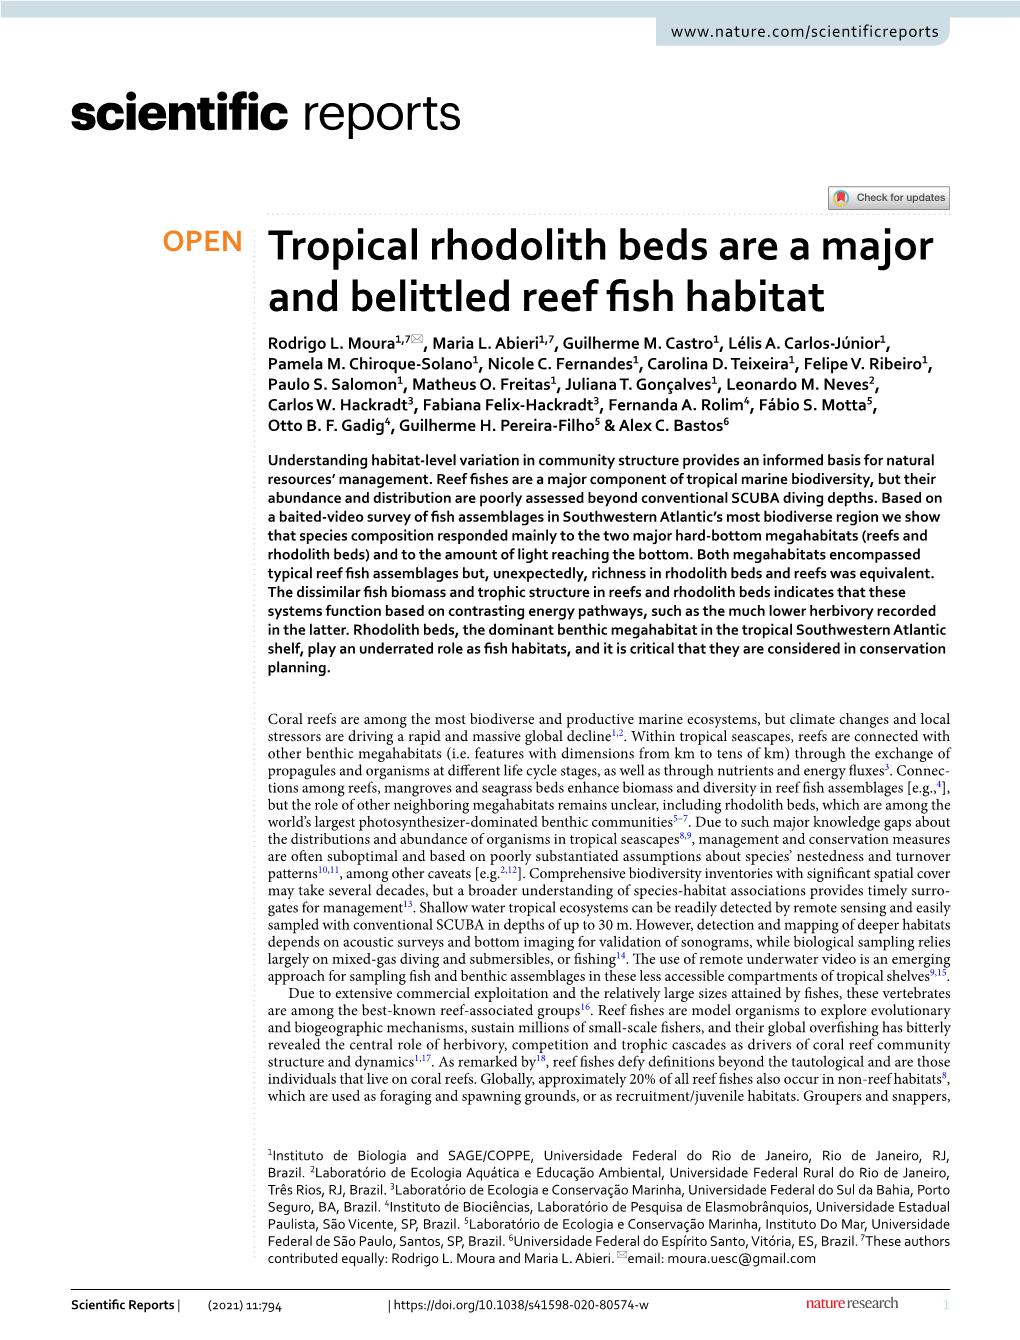 Tropical Rhodolith Beds Are a Major and Belittled Reef Fish Habitat